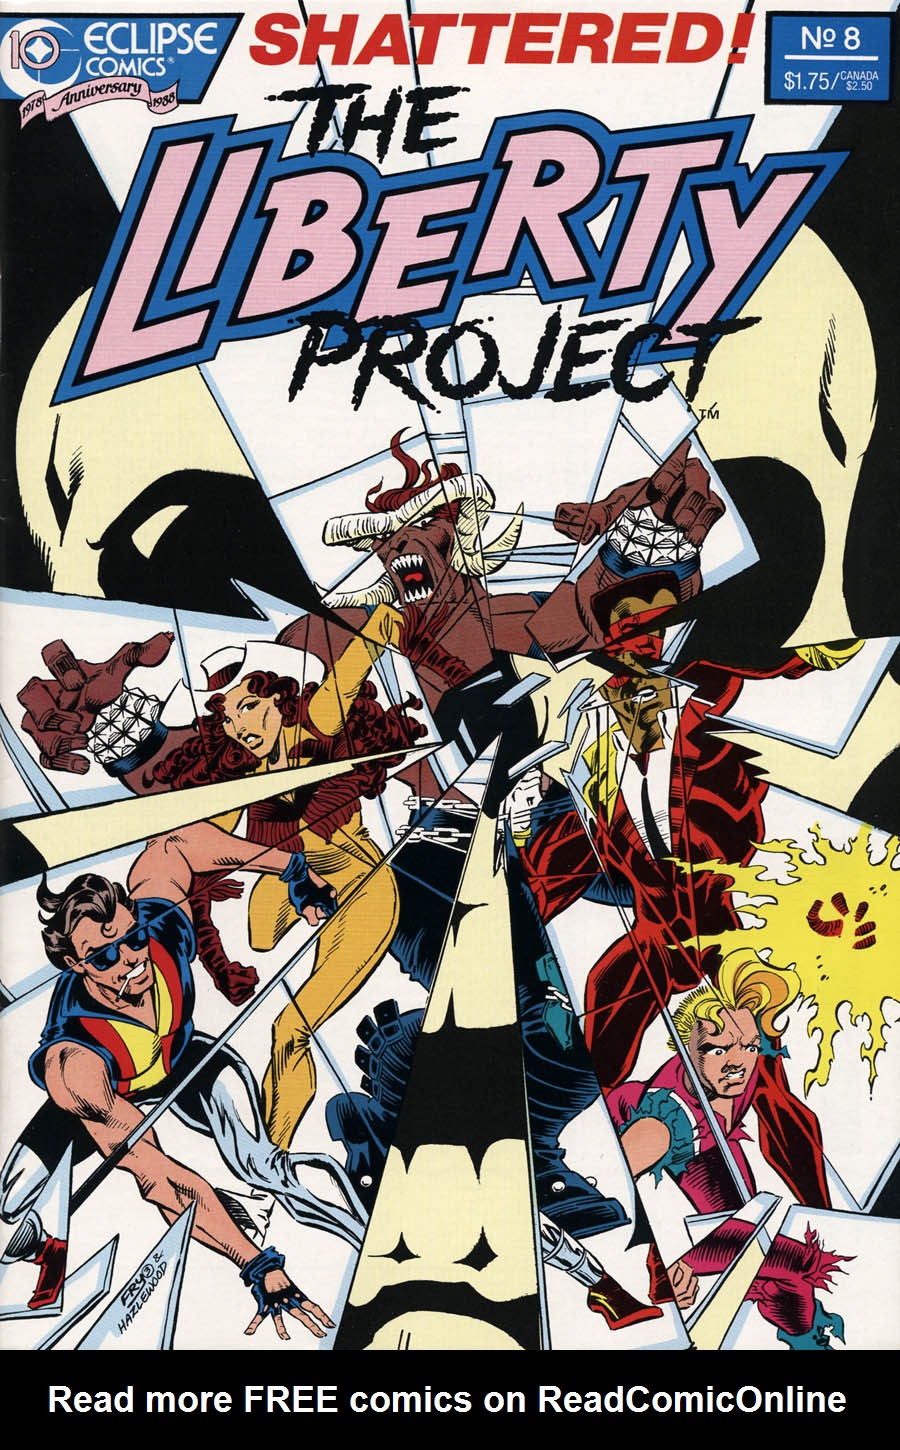 Read online Liberty Project comic -  Issue #8 - 1